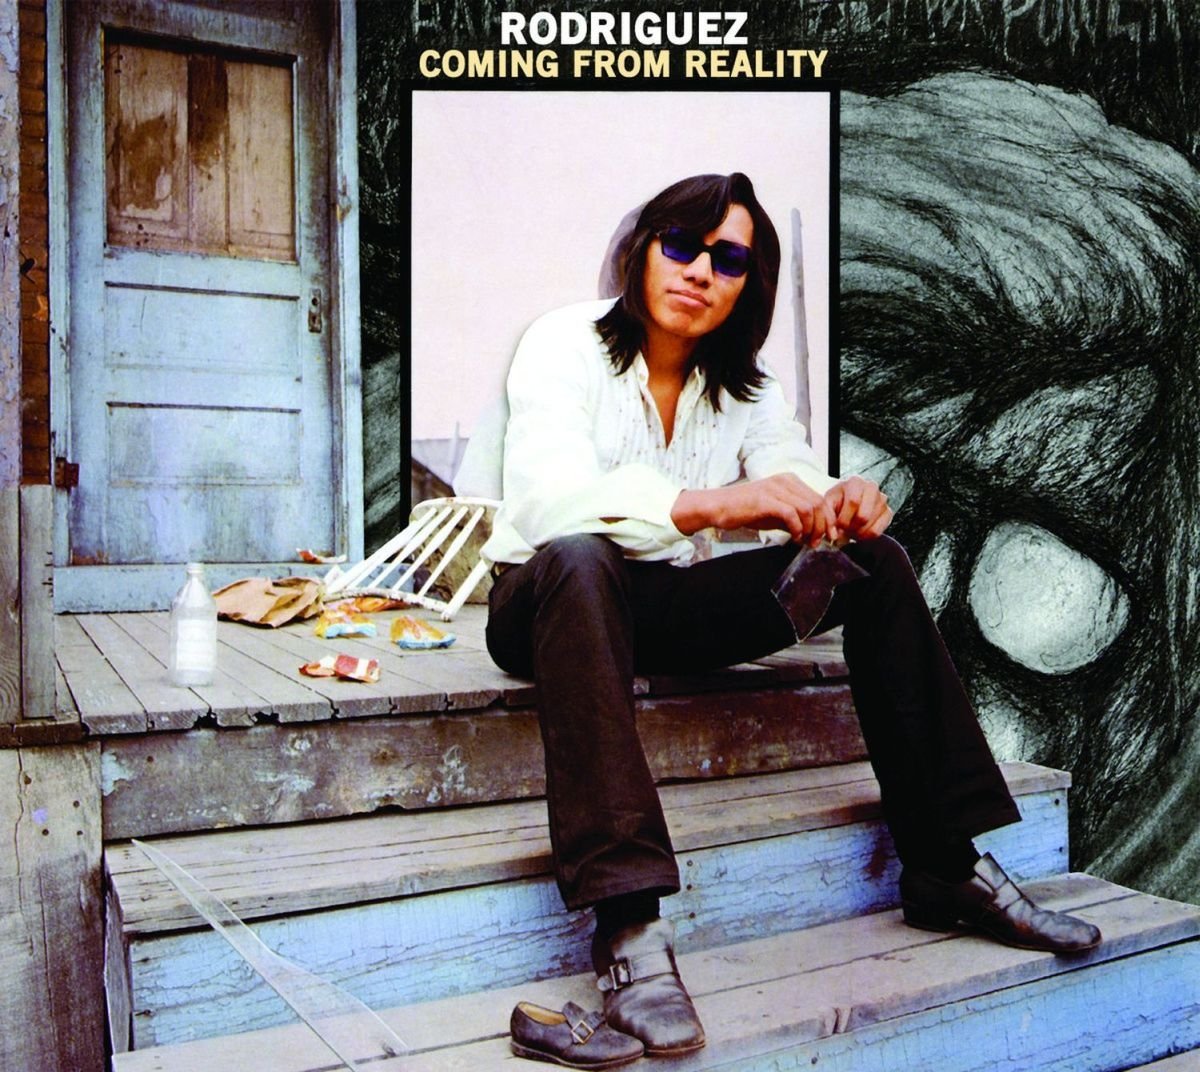 Rodriguez "Coming From Reality" LP